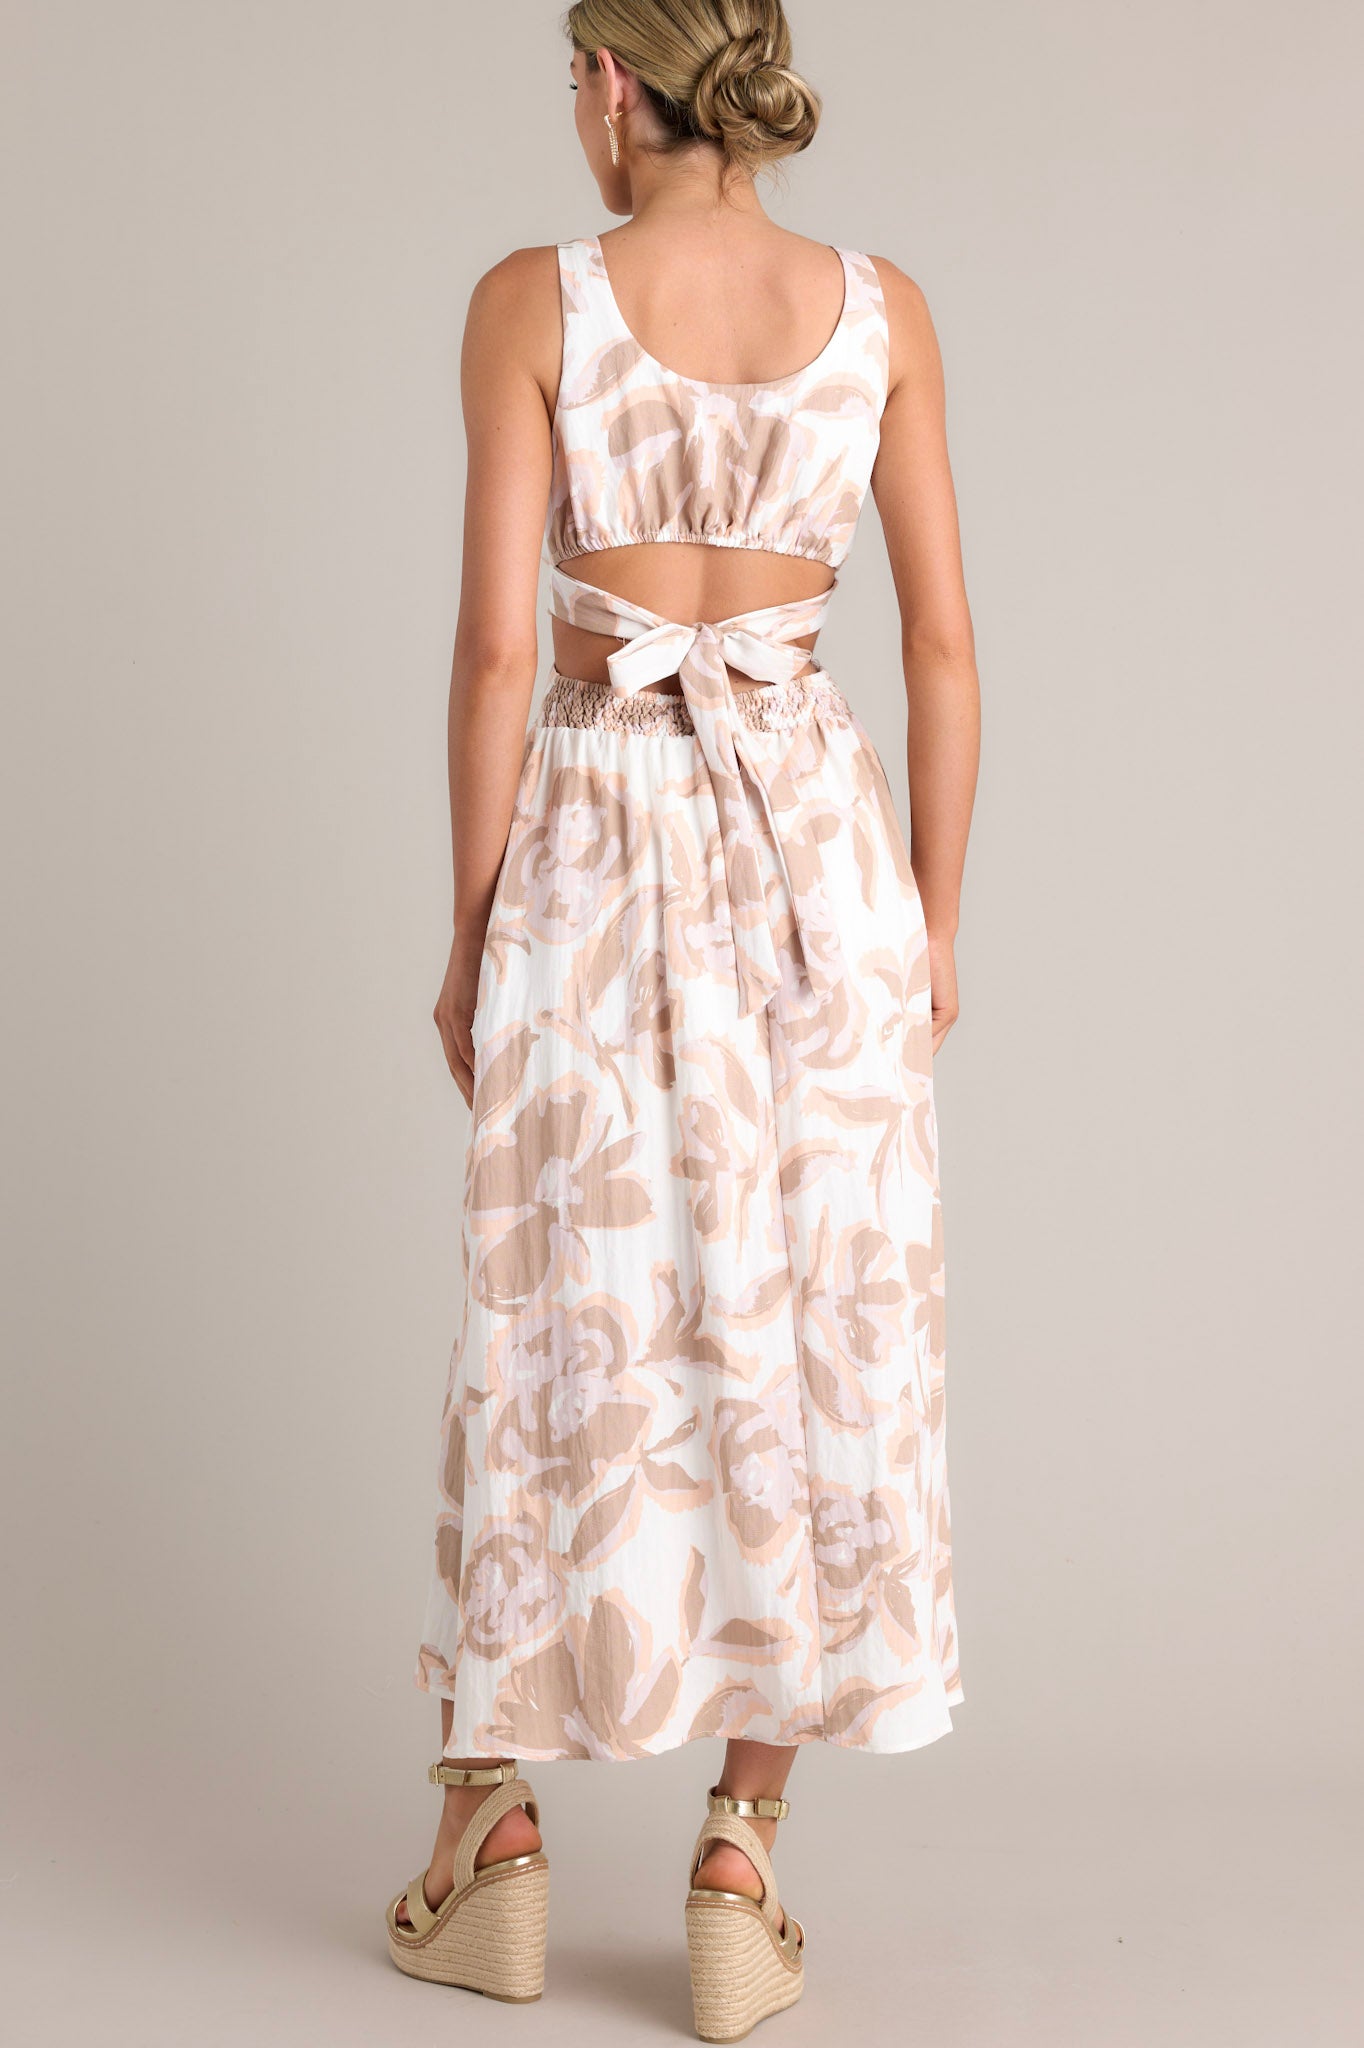 Back view of a white maxi dress showcasing the self-tie back feature, smocked back insert, thick straps, and all-over floral pattern.